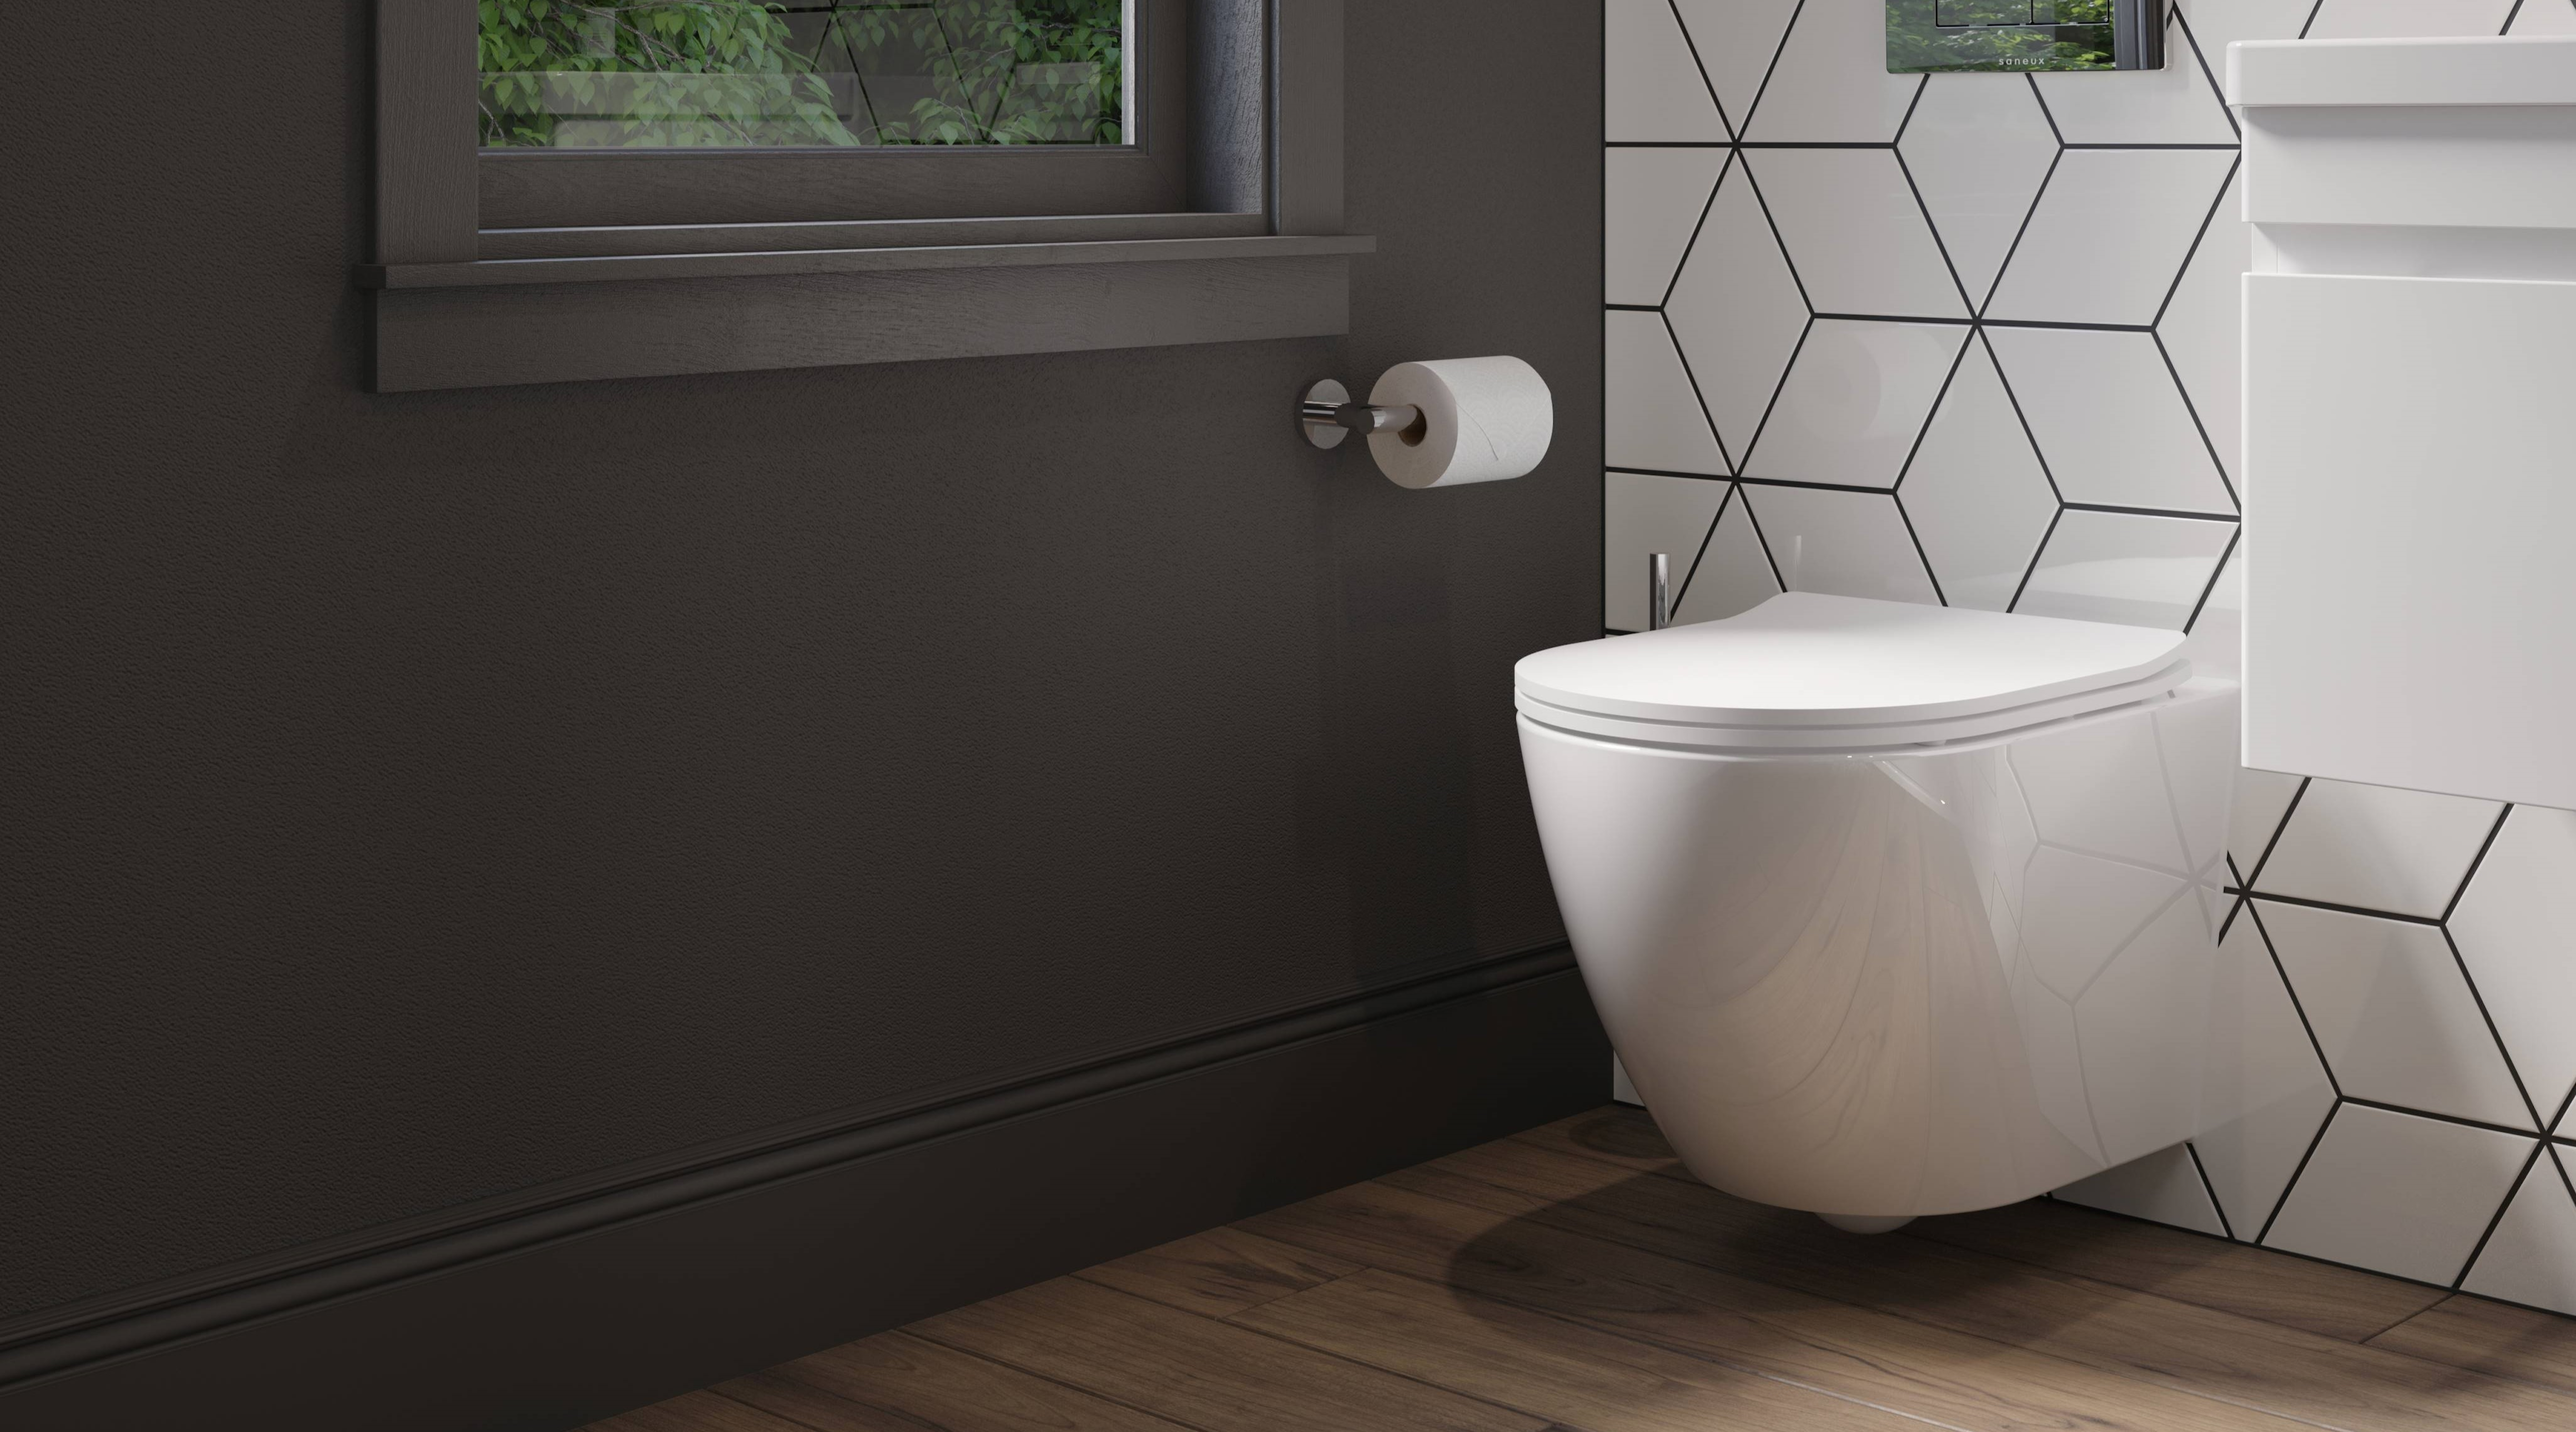 The new AIR by Saneux Wall Mounted Toilet